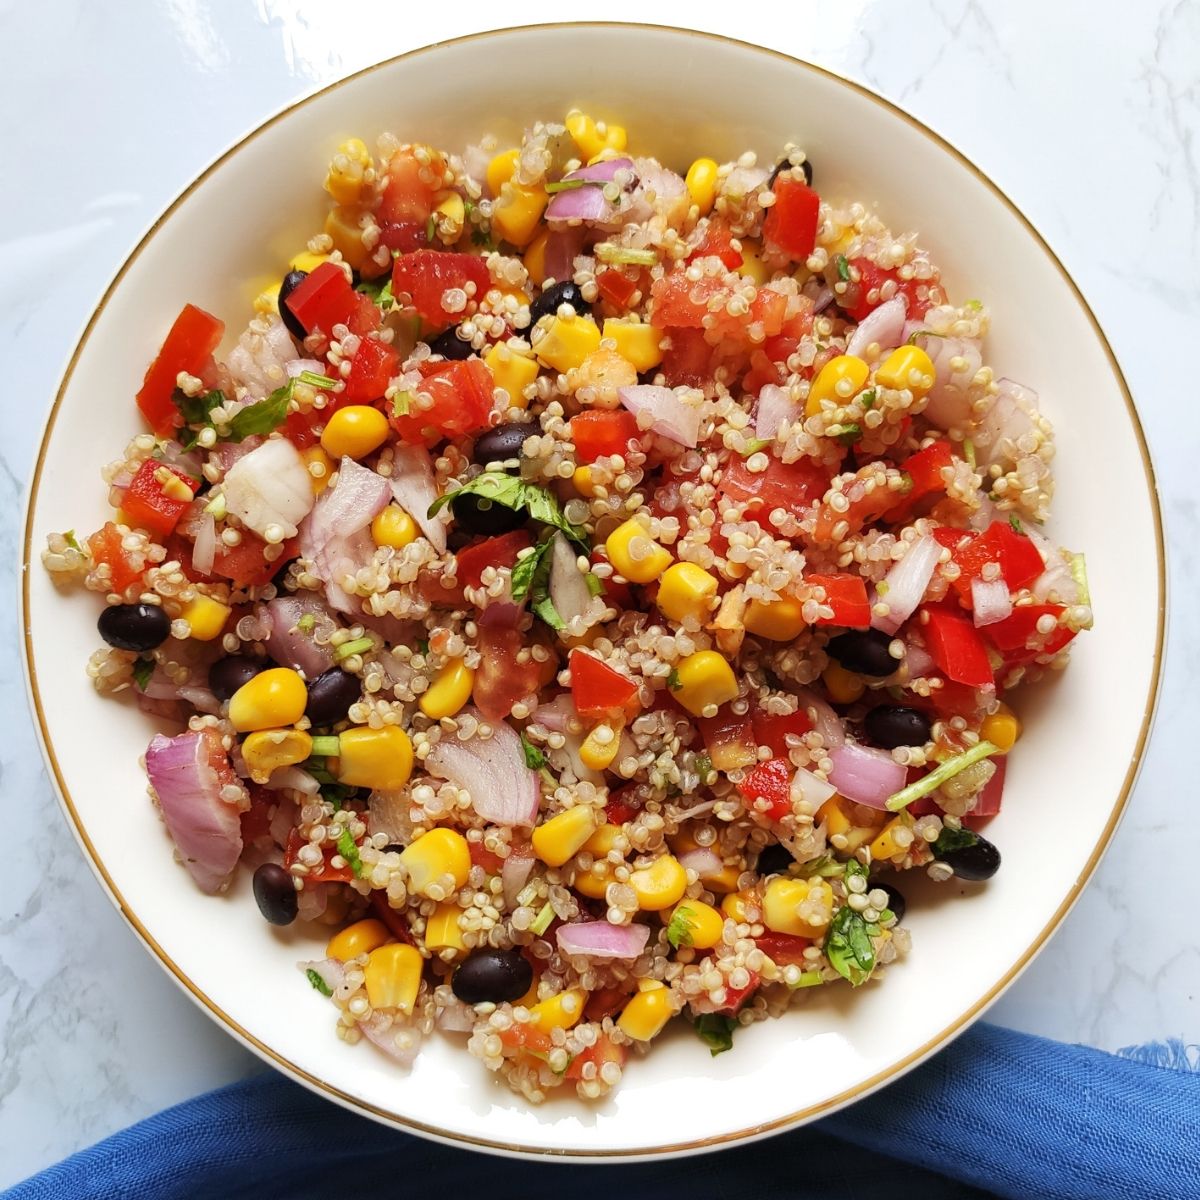 Mexican corn quinoa salad served in a white bowl kept on a blue table napkin